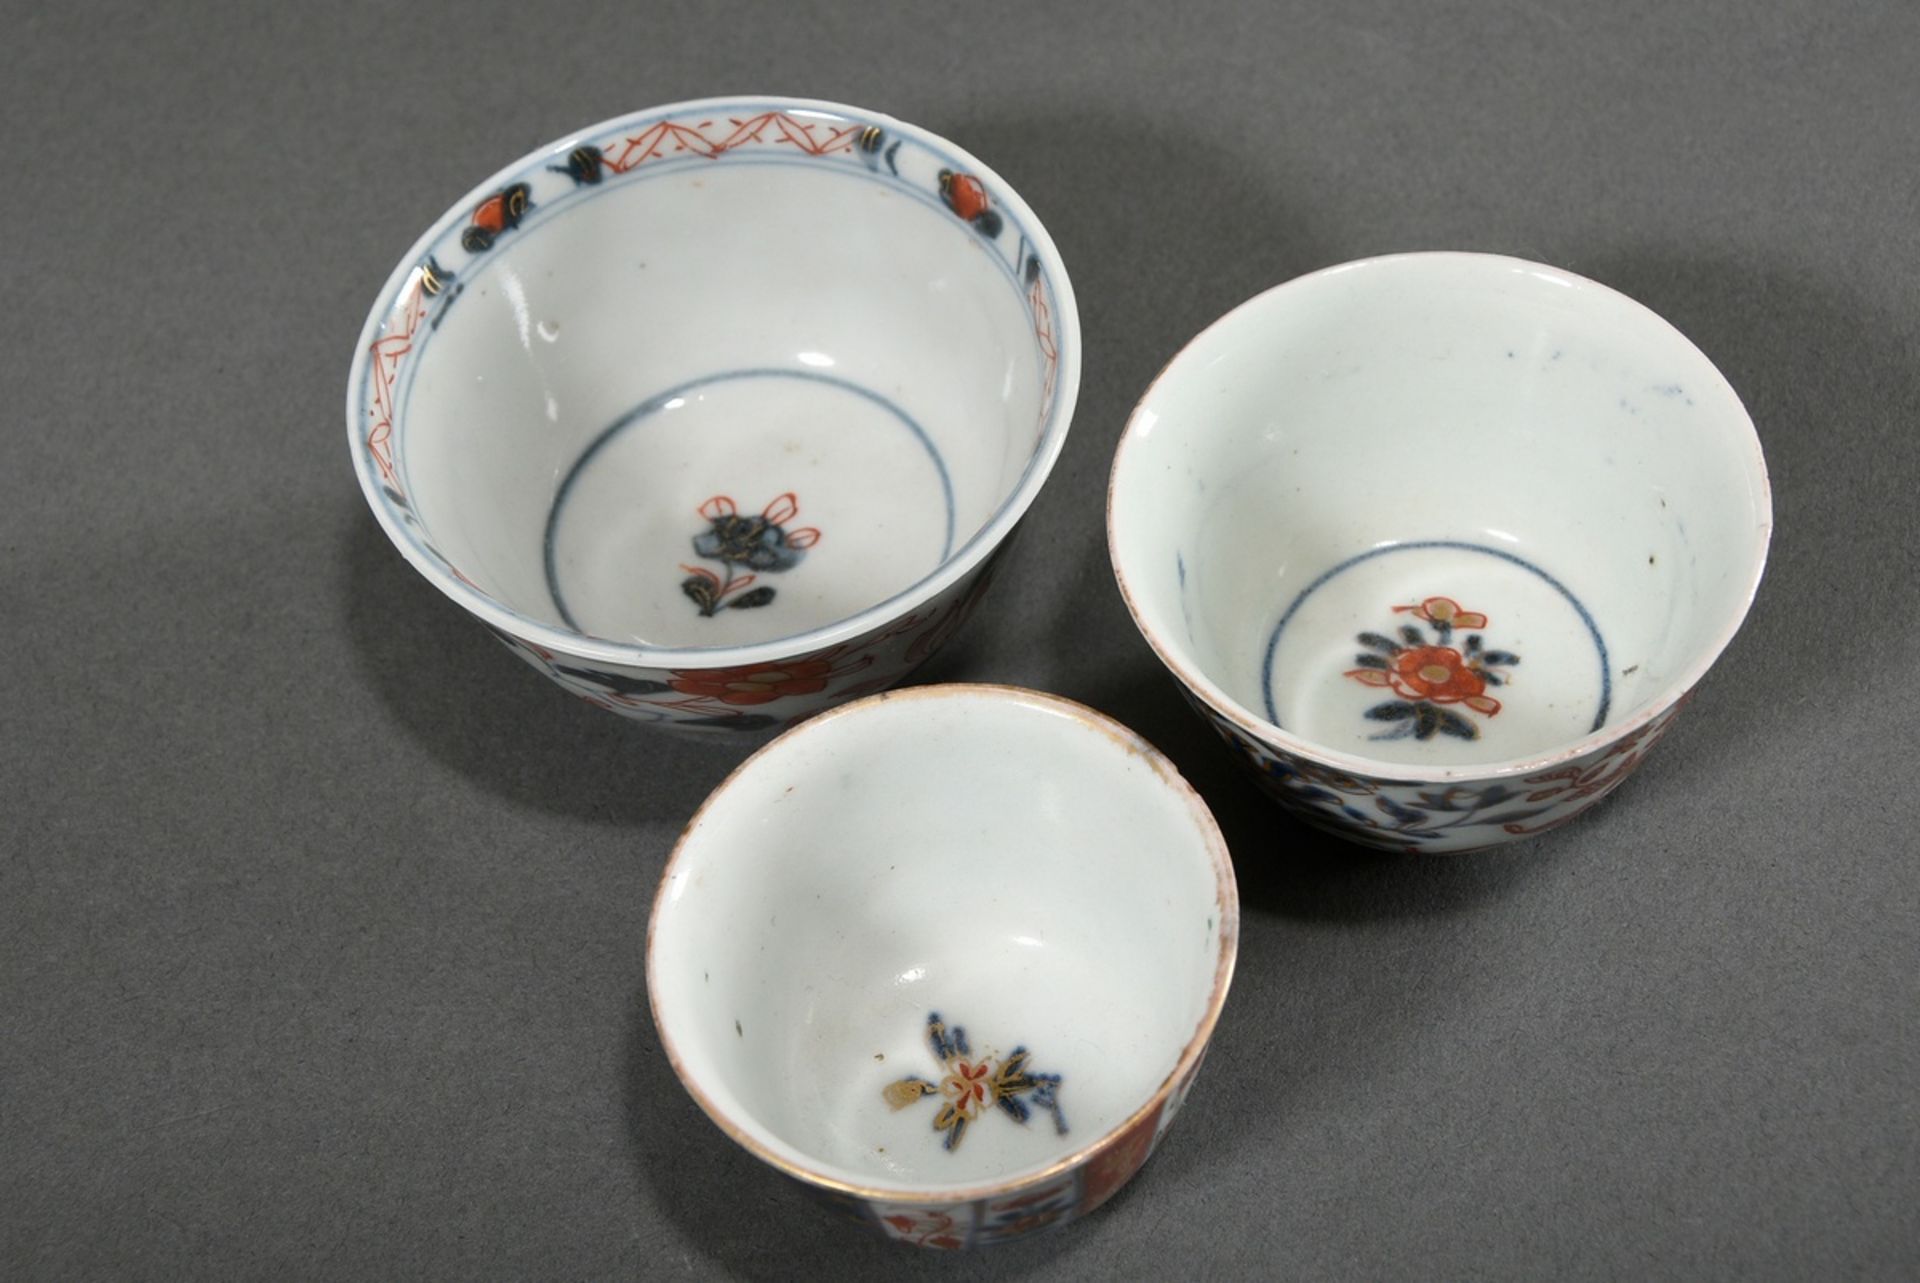 7 Various Japanese porcelains with Imari décor in underglaze blue, iron red and gold: 3 various sak - Image 4 of 8